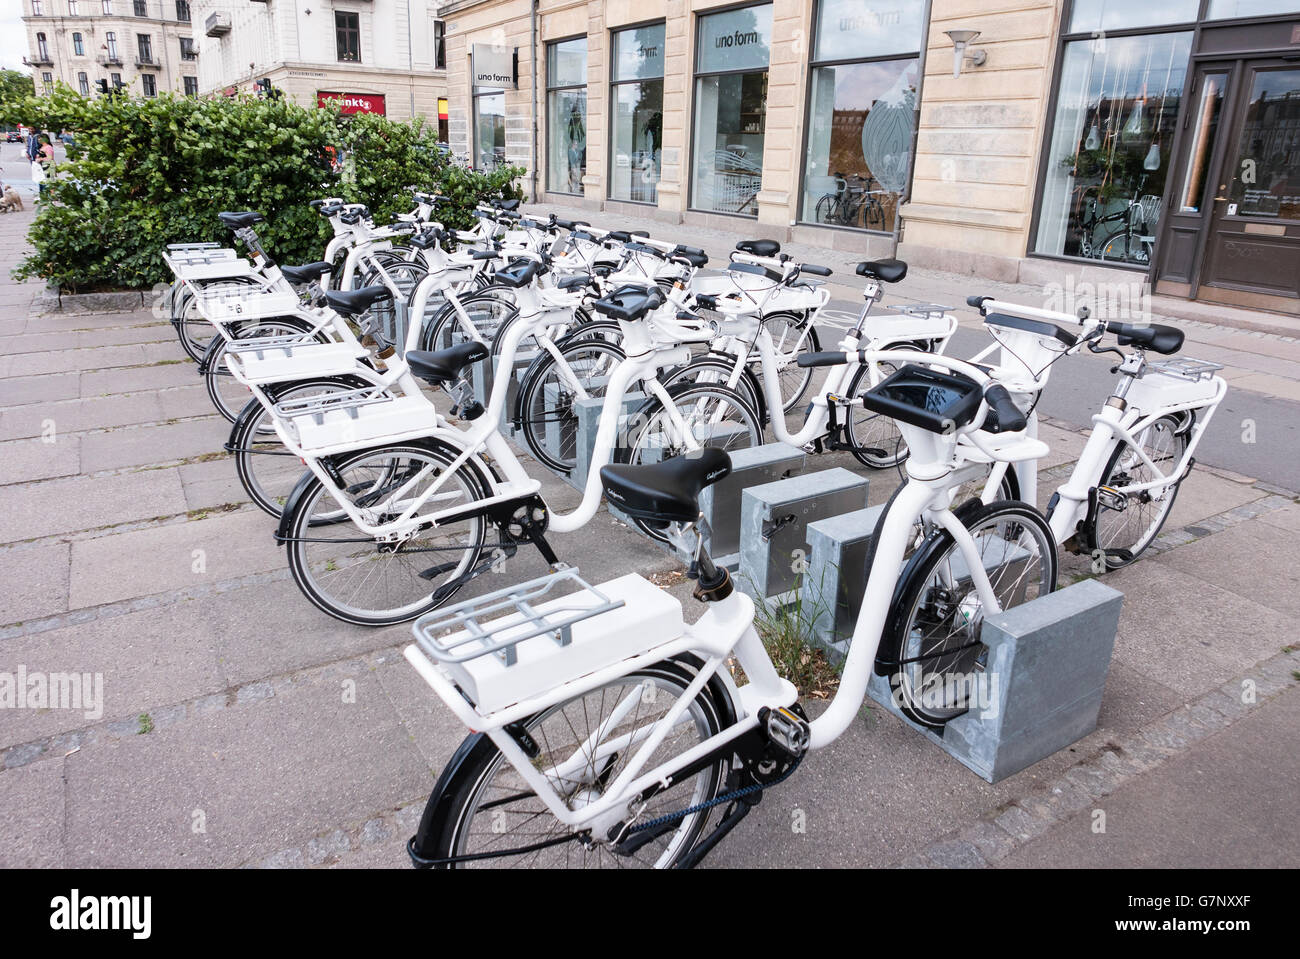 Electric 'Go-Bikes' in Copenhagen, Denmark, which can be hired by the hour (approx €2).  Includes touchscreens for GPS maps and Stock Photo